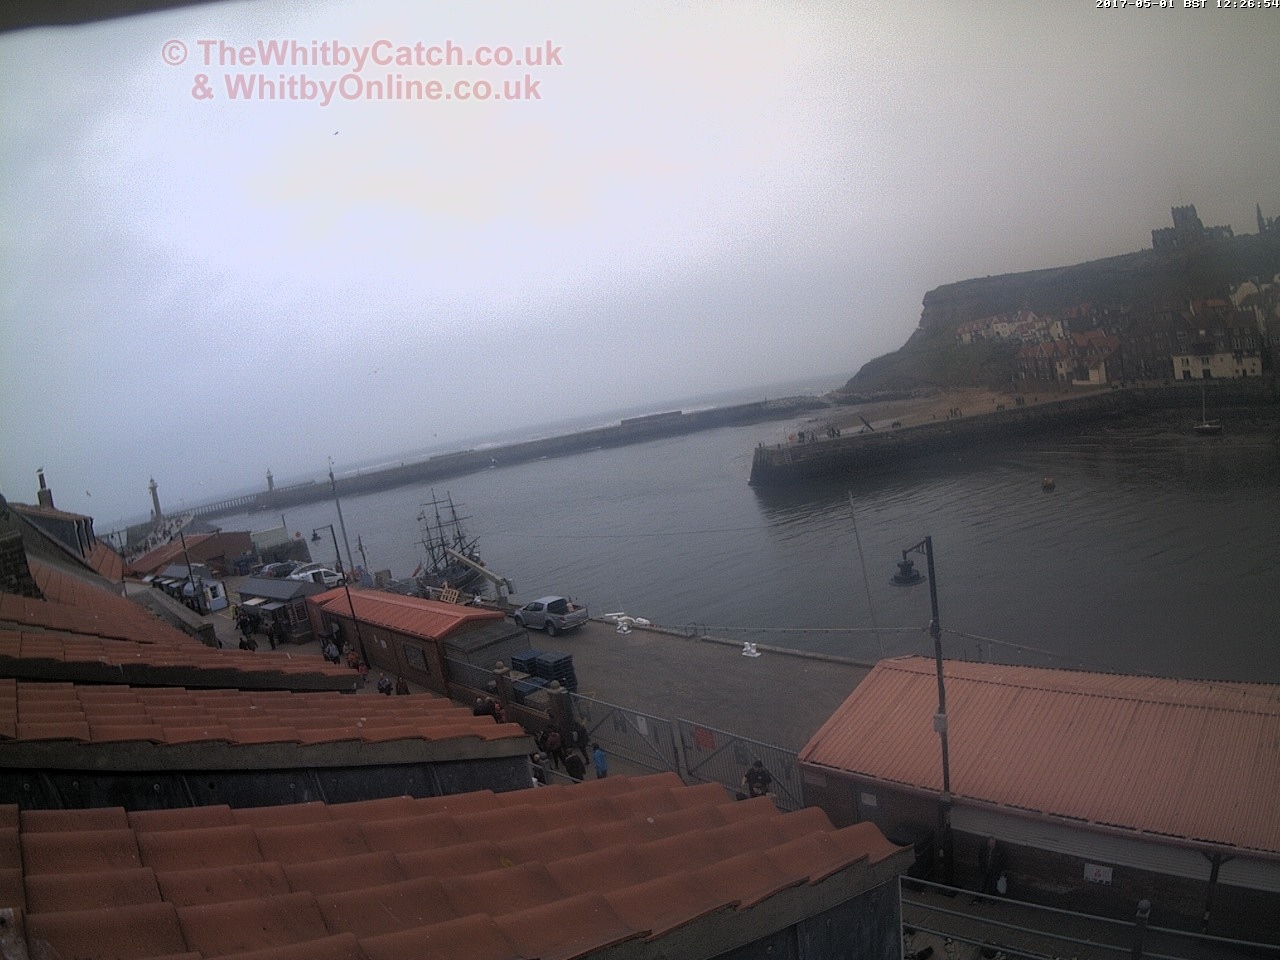 Whitby Mon 1st May 2017 12:27.